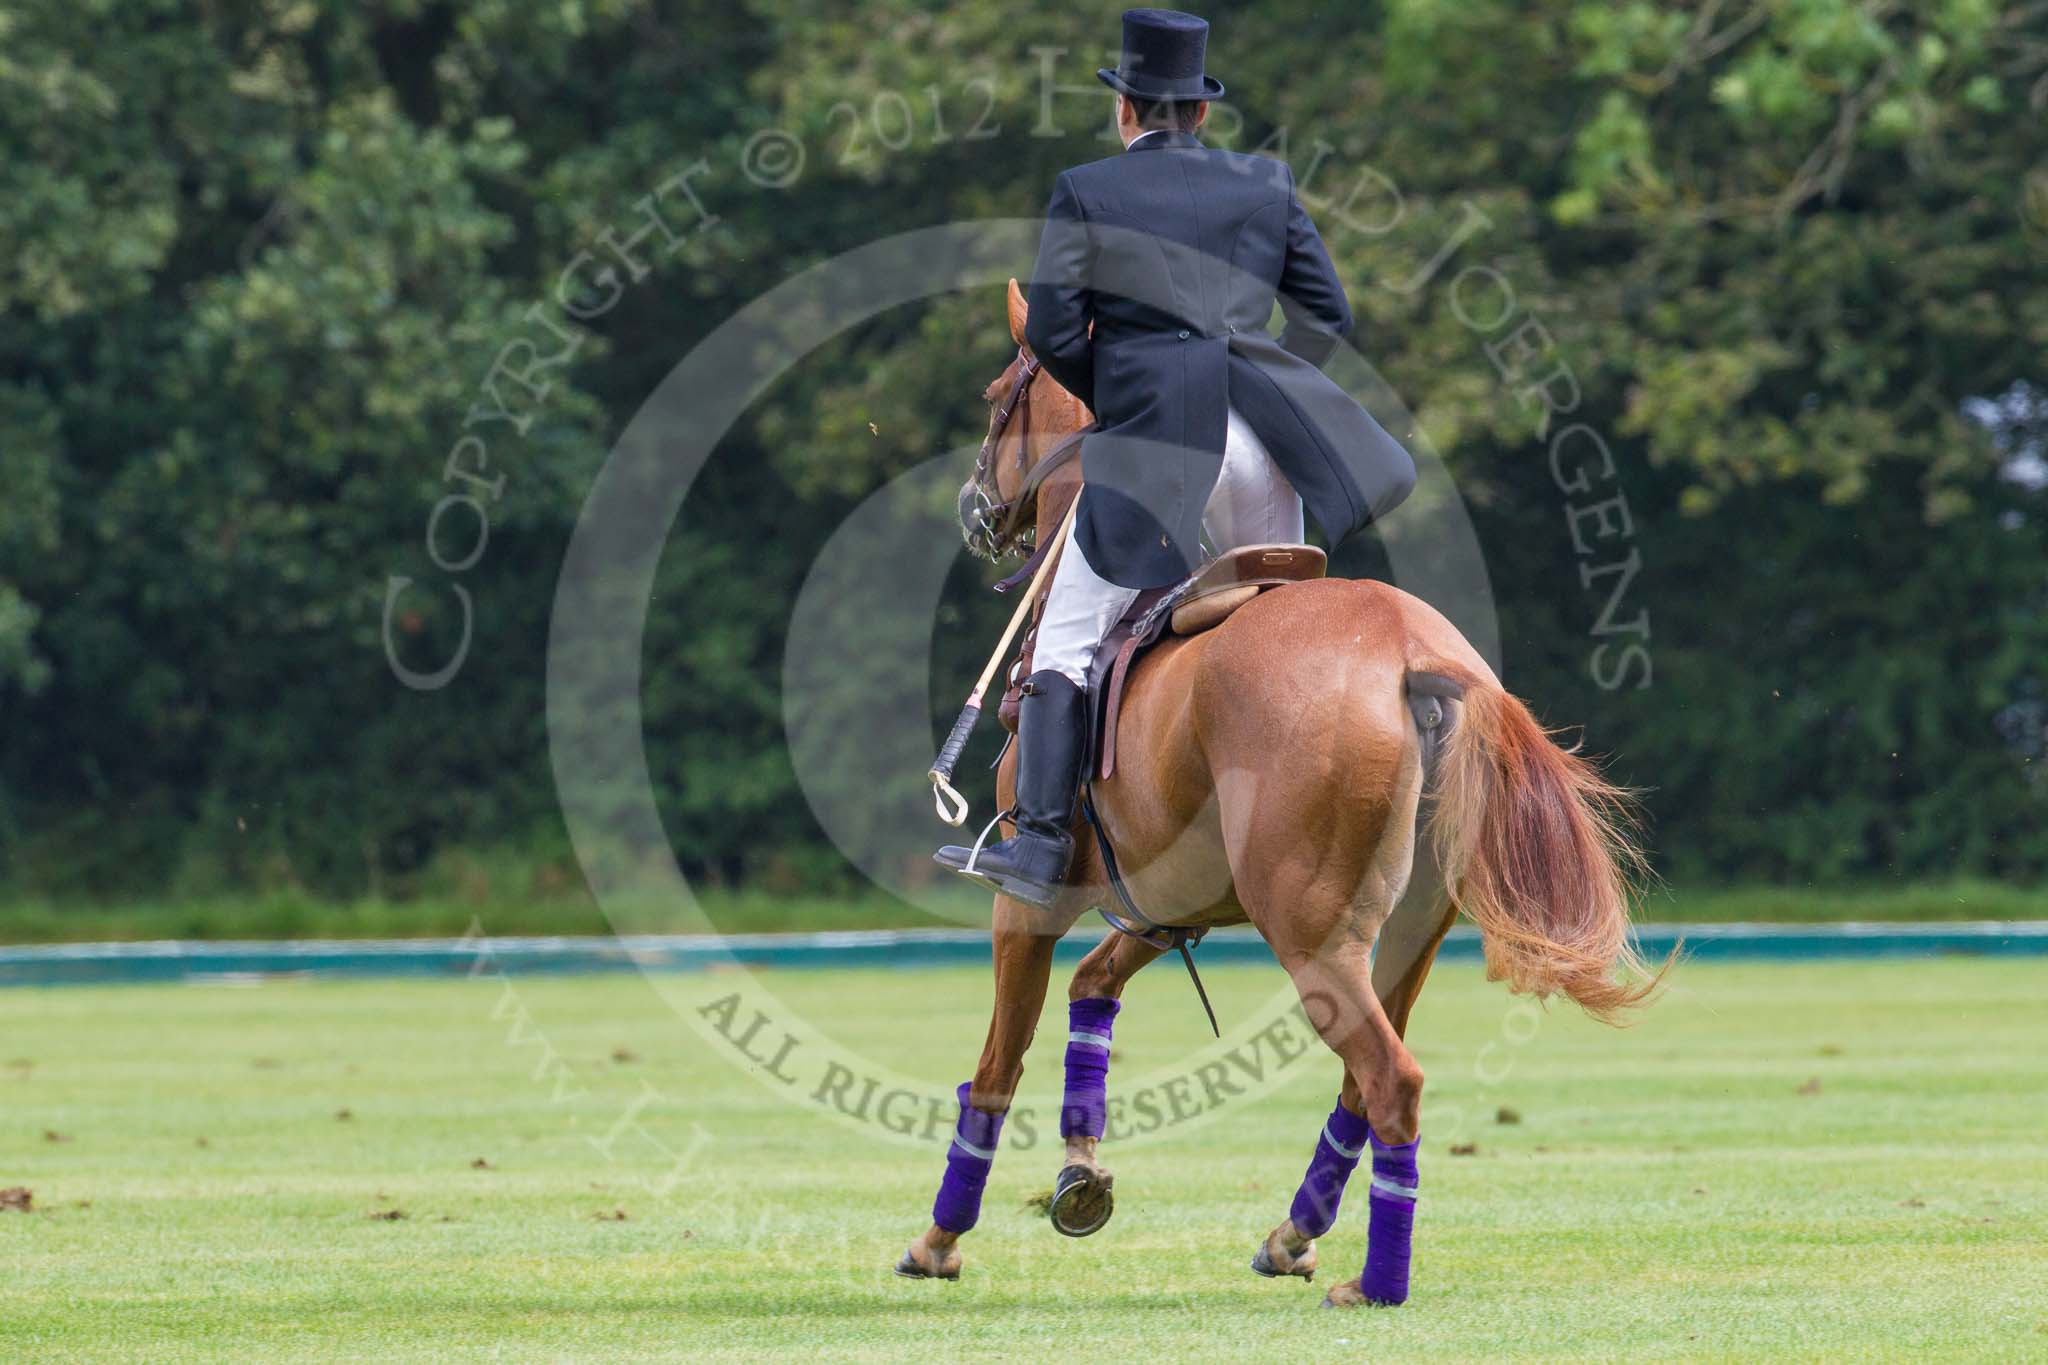 7th Heritage Polo Cup semi-finals: Umpire Gaston Devrient In Tail & Ascot Top Hat..
Hurtwood Park Polo Club,
Ewhurst Green,
Surrey,
United Kingdom,
on 04 August 2012 at 11:24, image #38